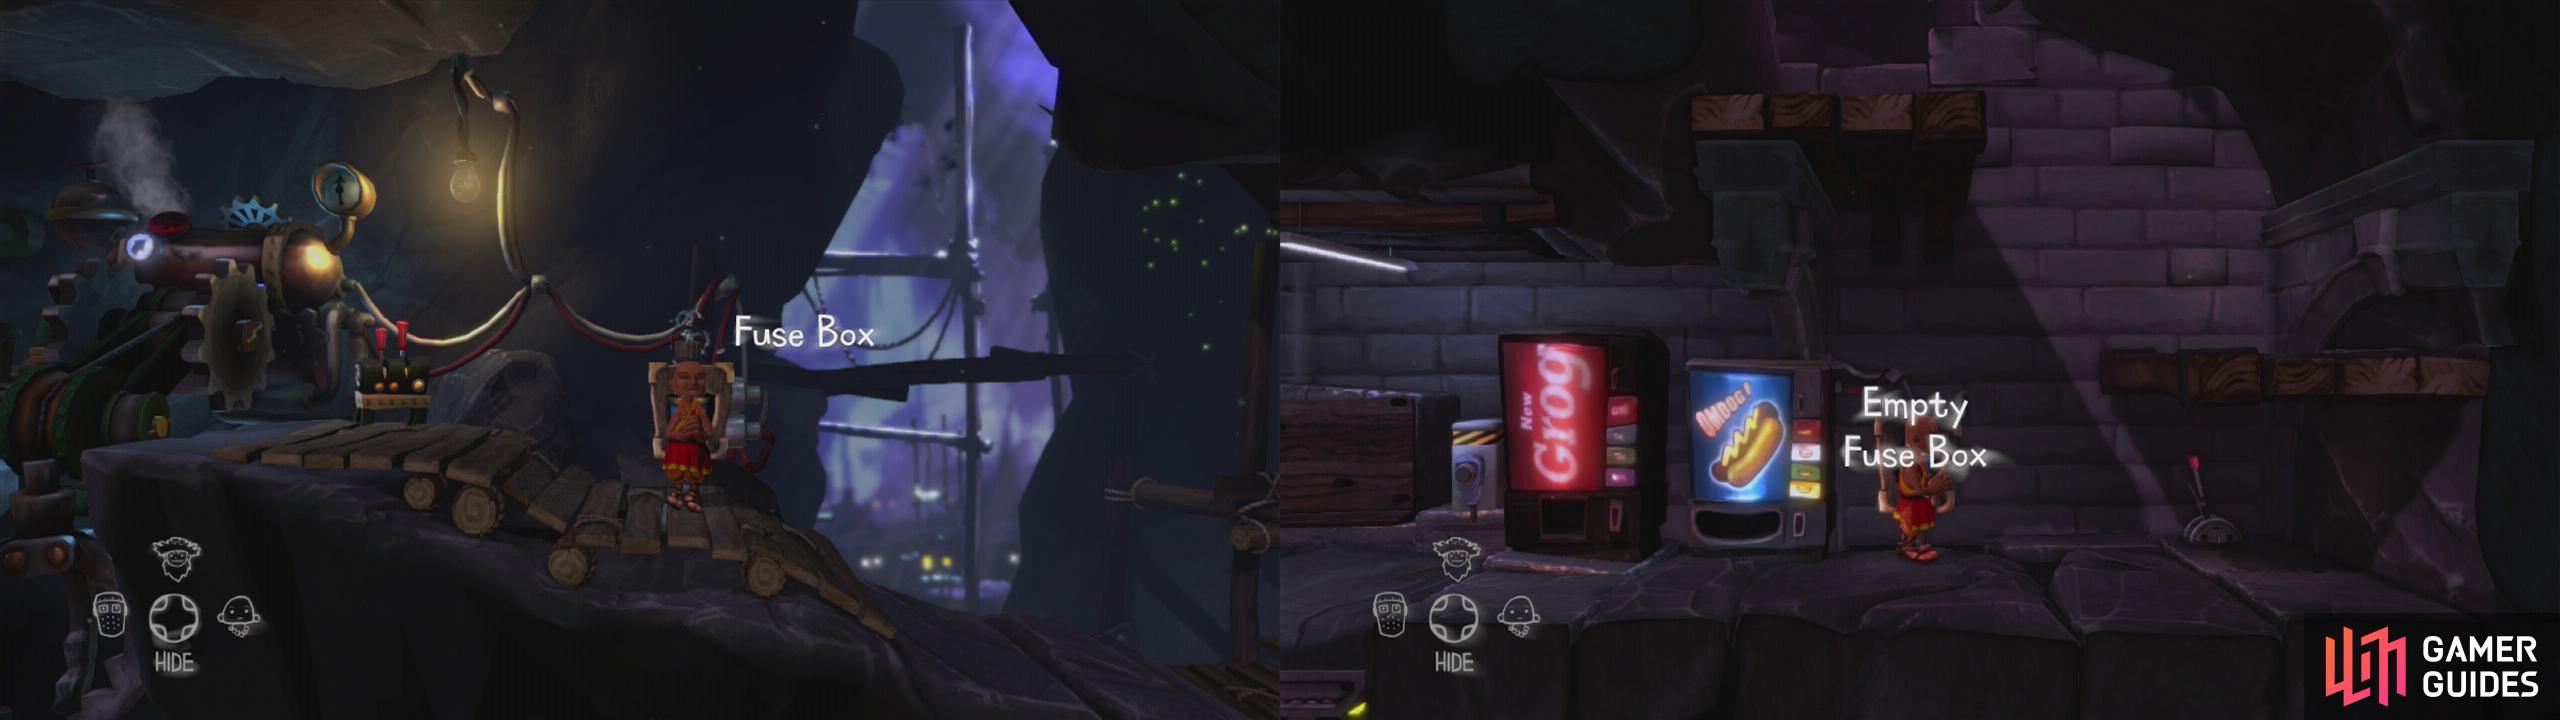 Grab the fuse from the fuse box at the top of the area (left) and then place it in the fuse box int he vending machine room (right).